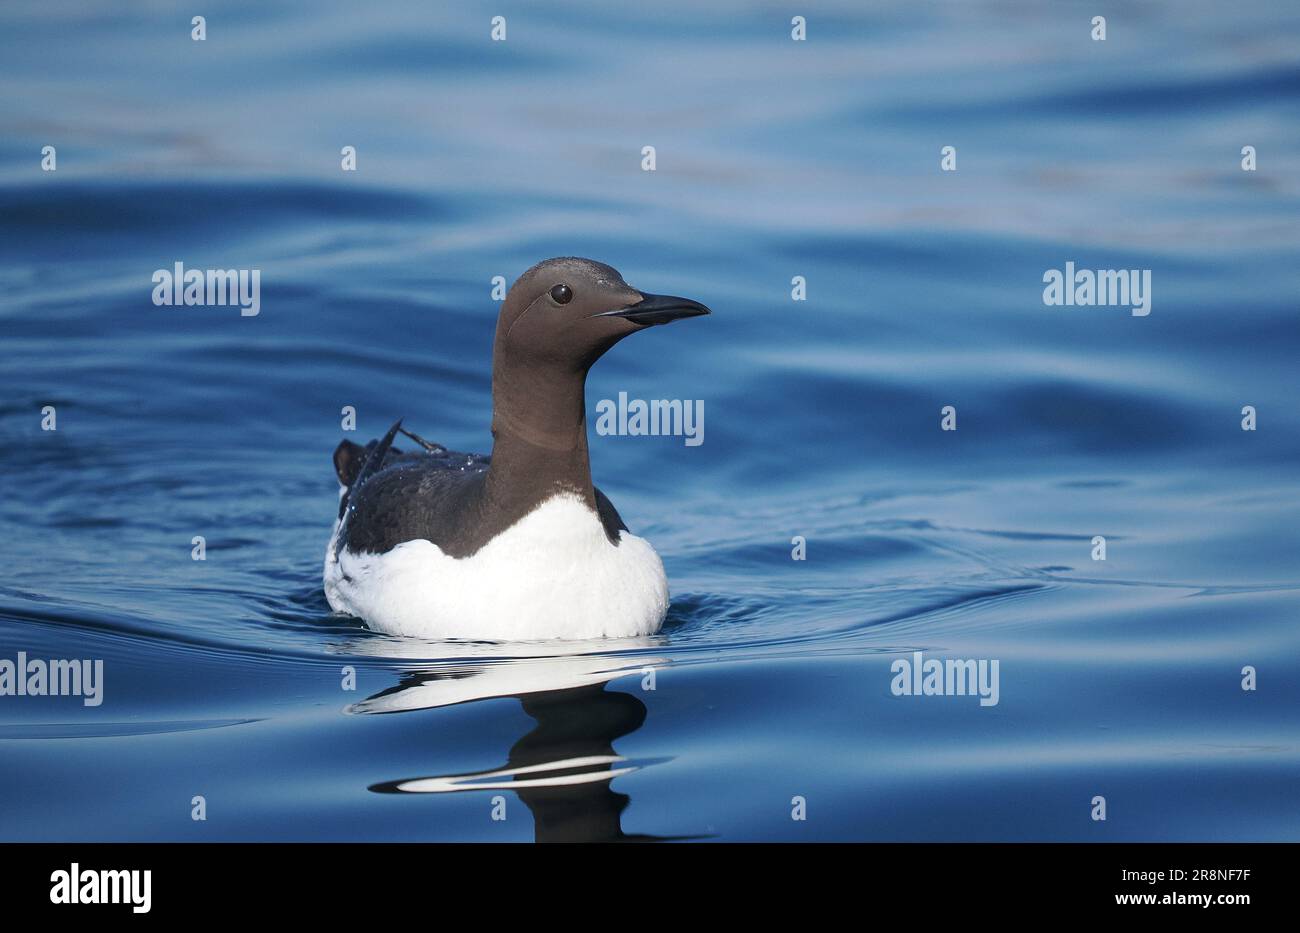 Guillemots breed on the cliffs of Handa Island,  feeding on fish in the surrounding waters. Stock Photo